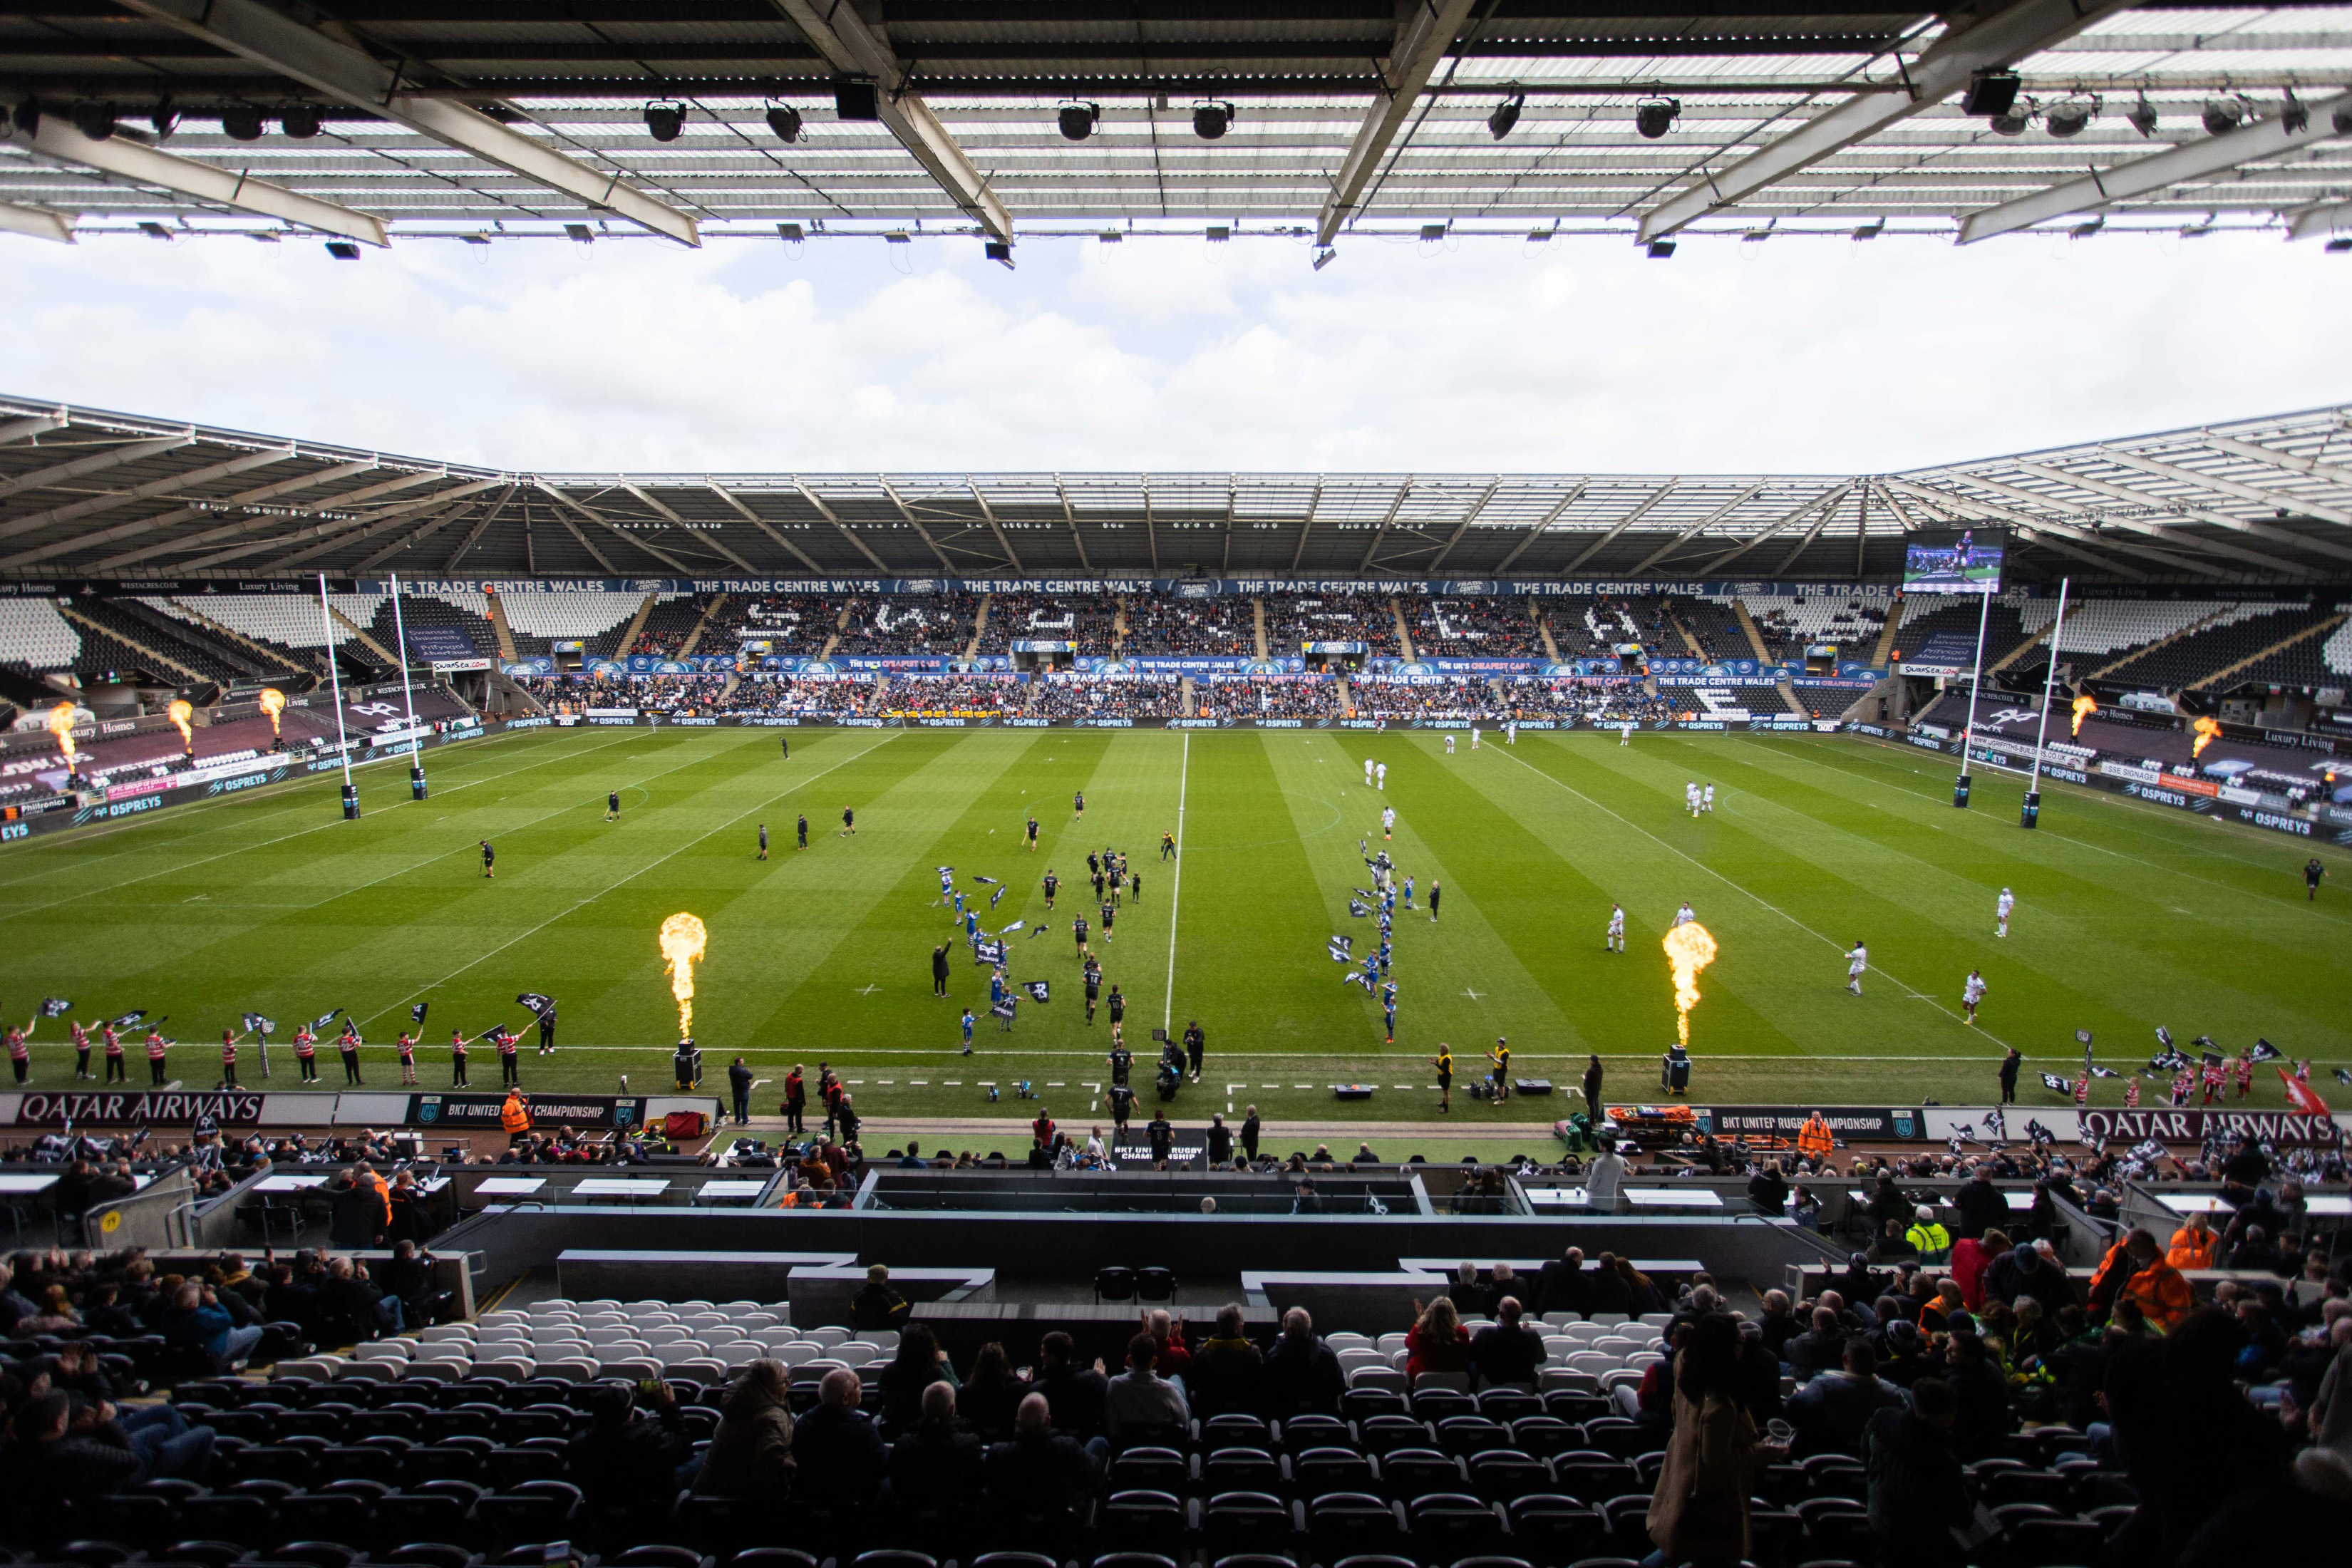 Swansea.com stadium welcomes the players to the field as Ospreys take on Dragons in a Welsh Derby